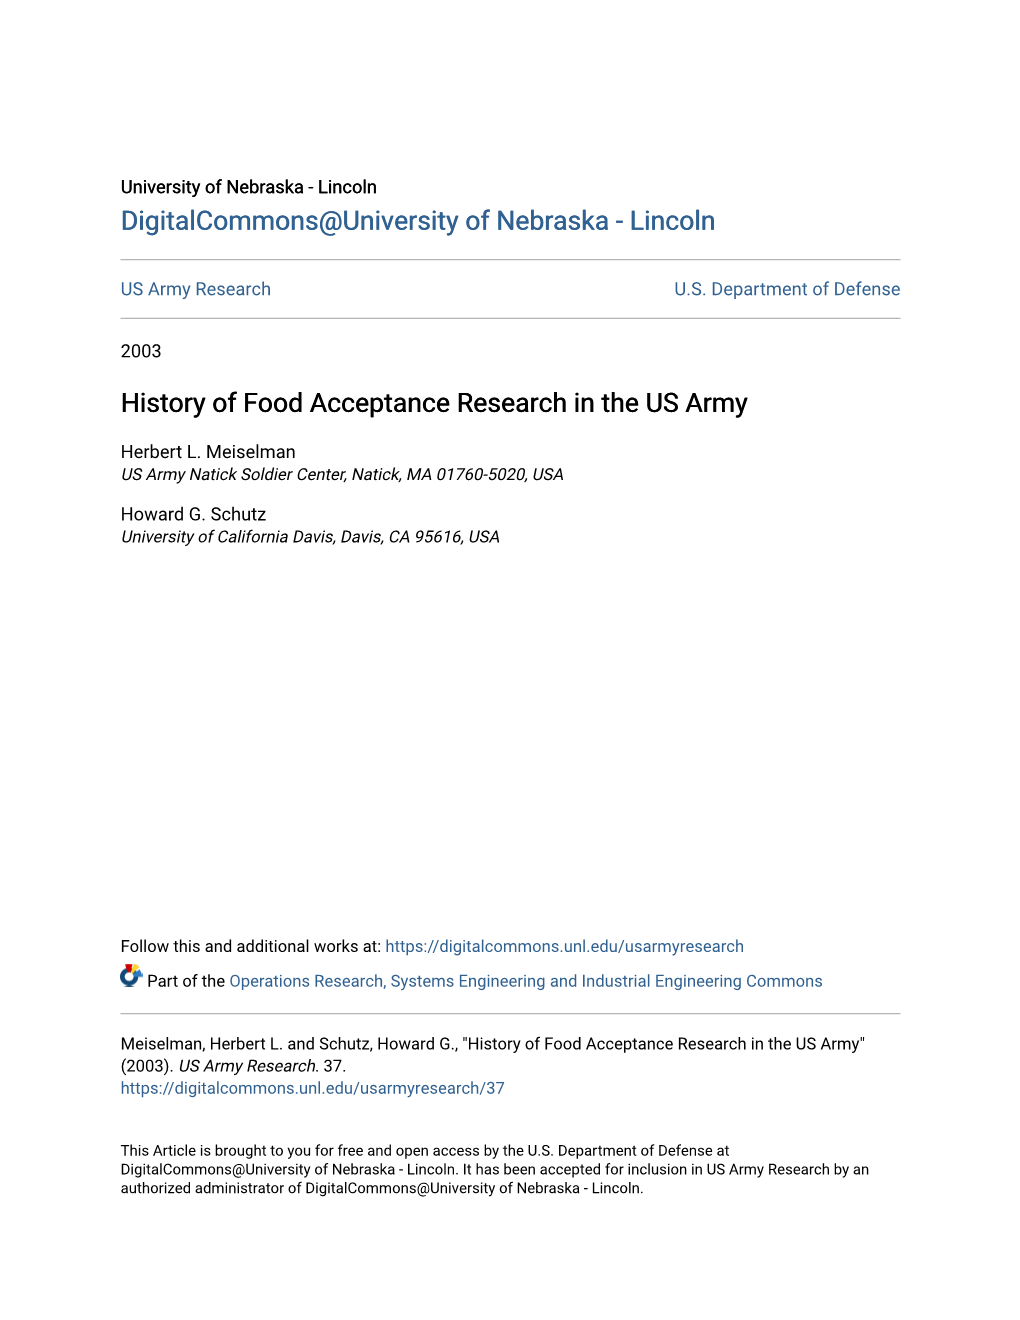 History of Food Acceptance Research in the US Army